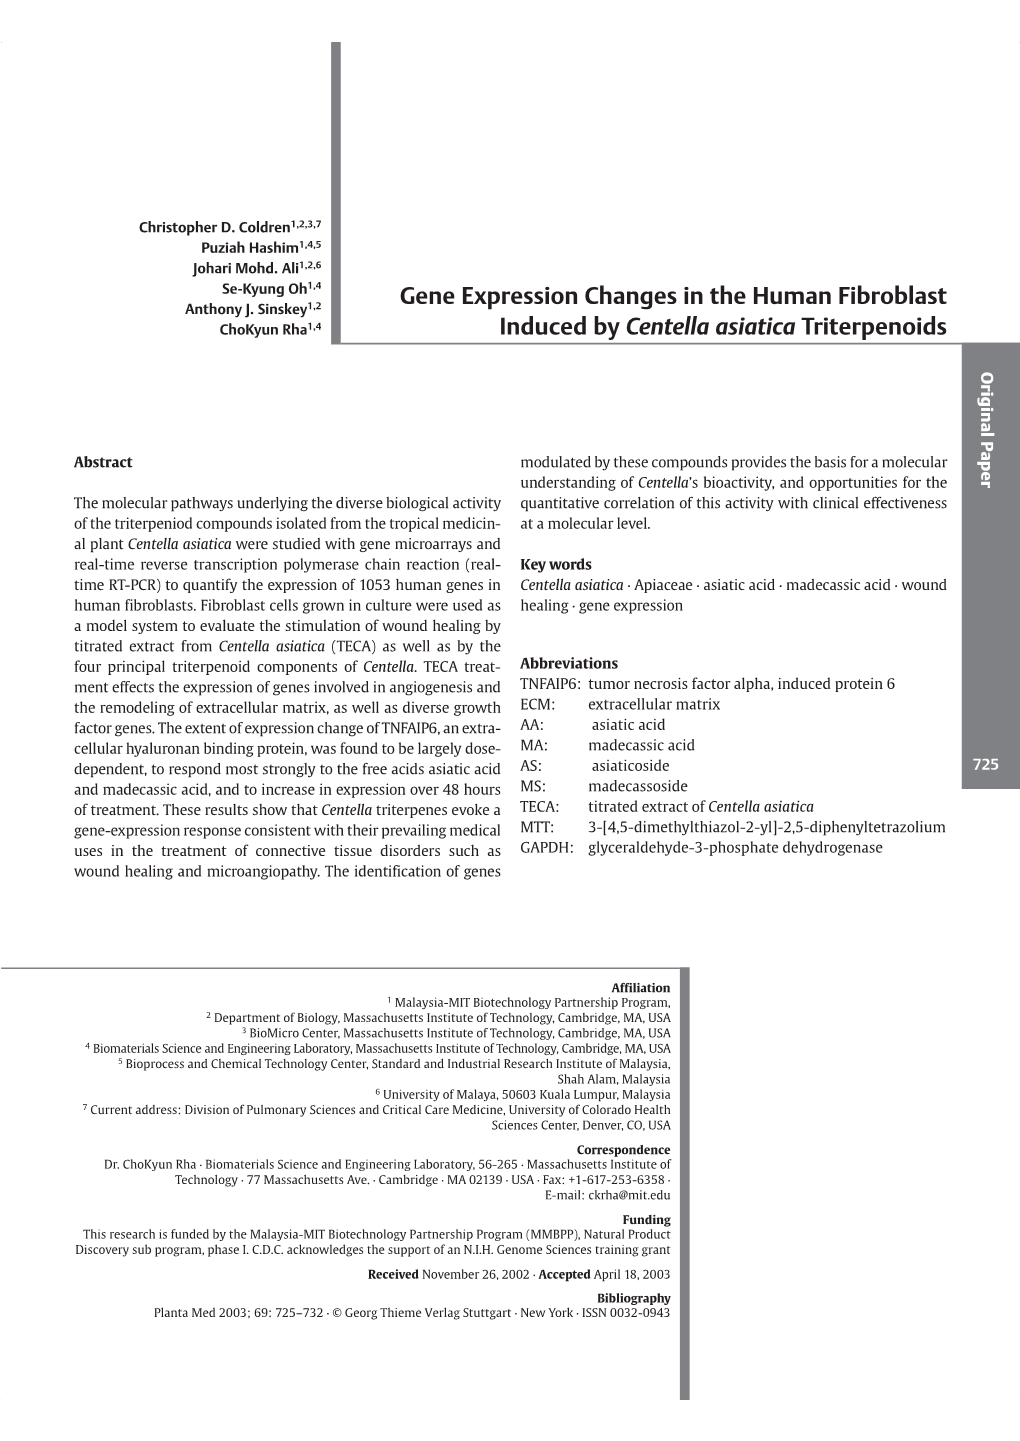 Gene Expression Changes in the Human Fibroblast Induced By